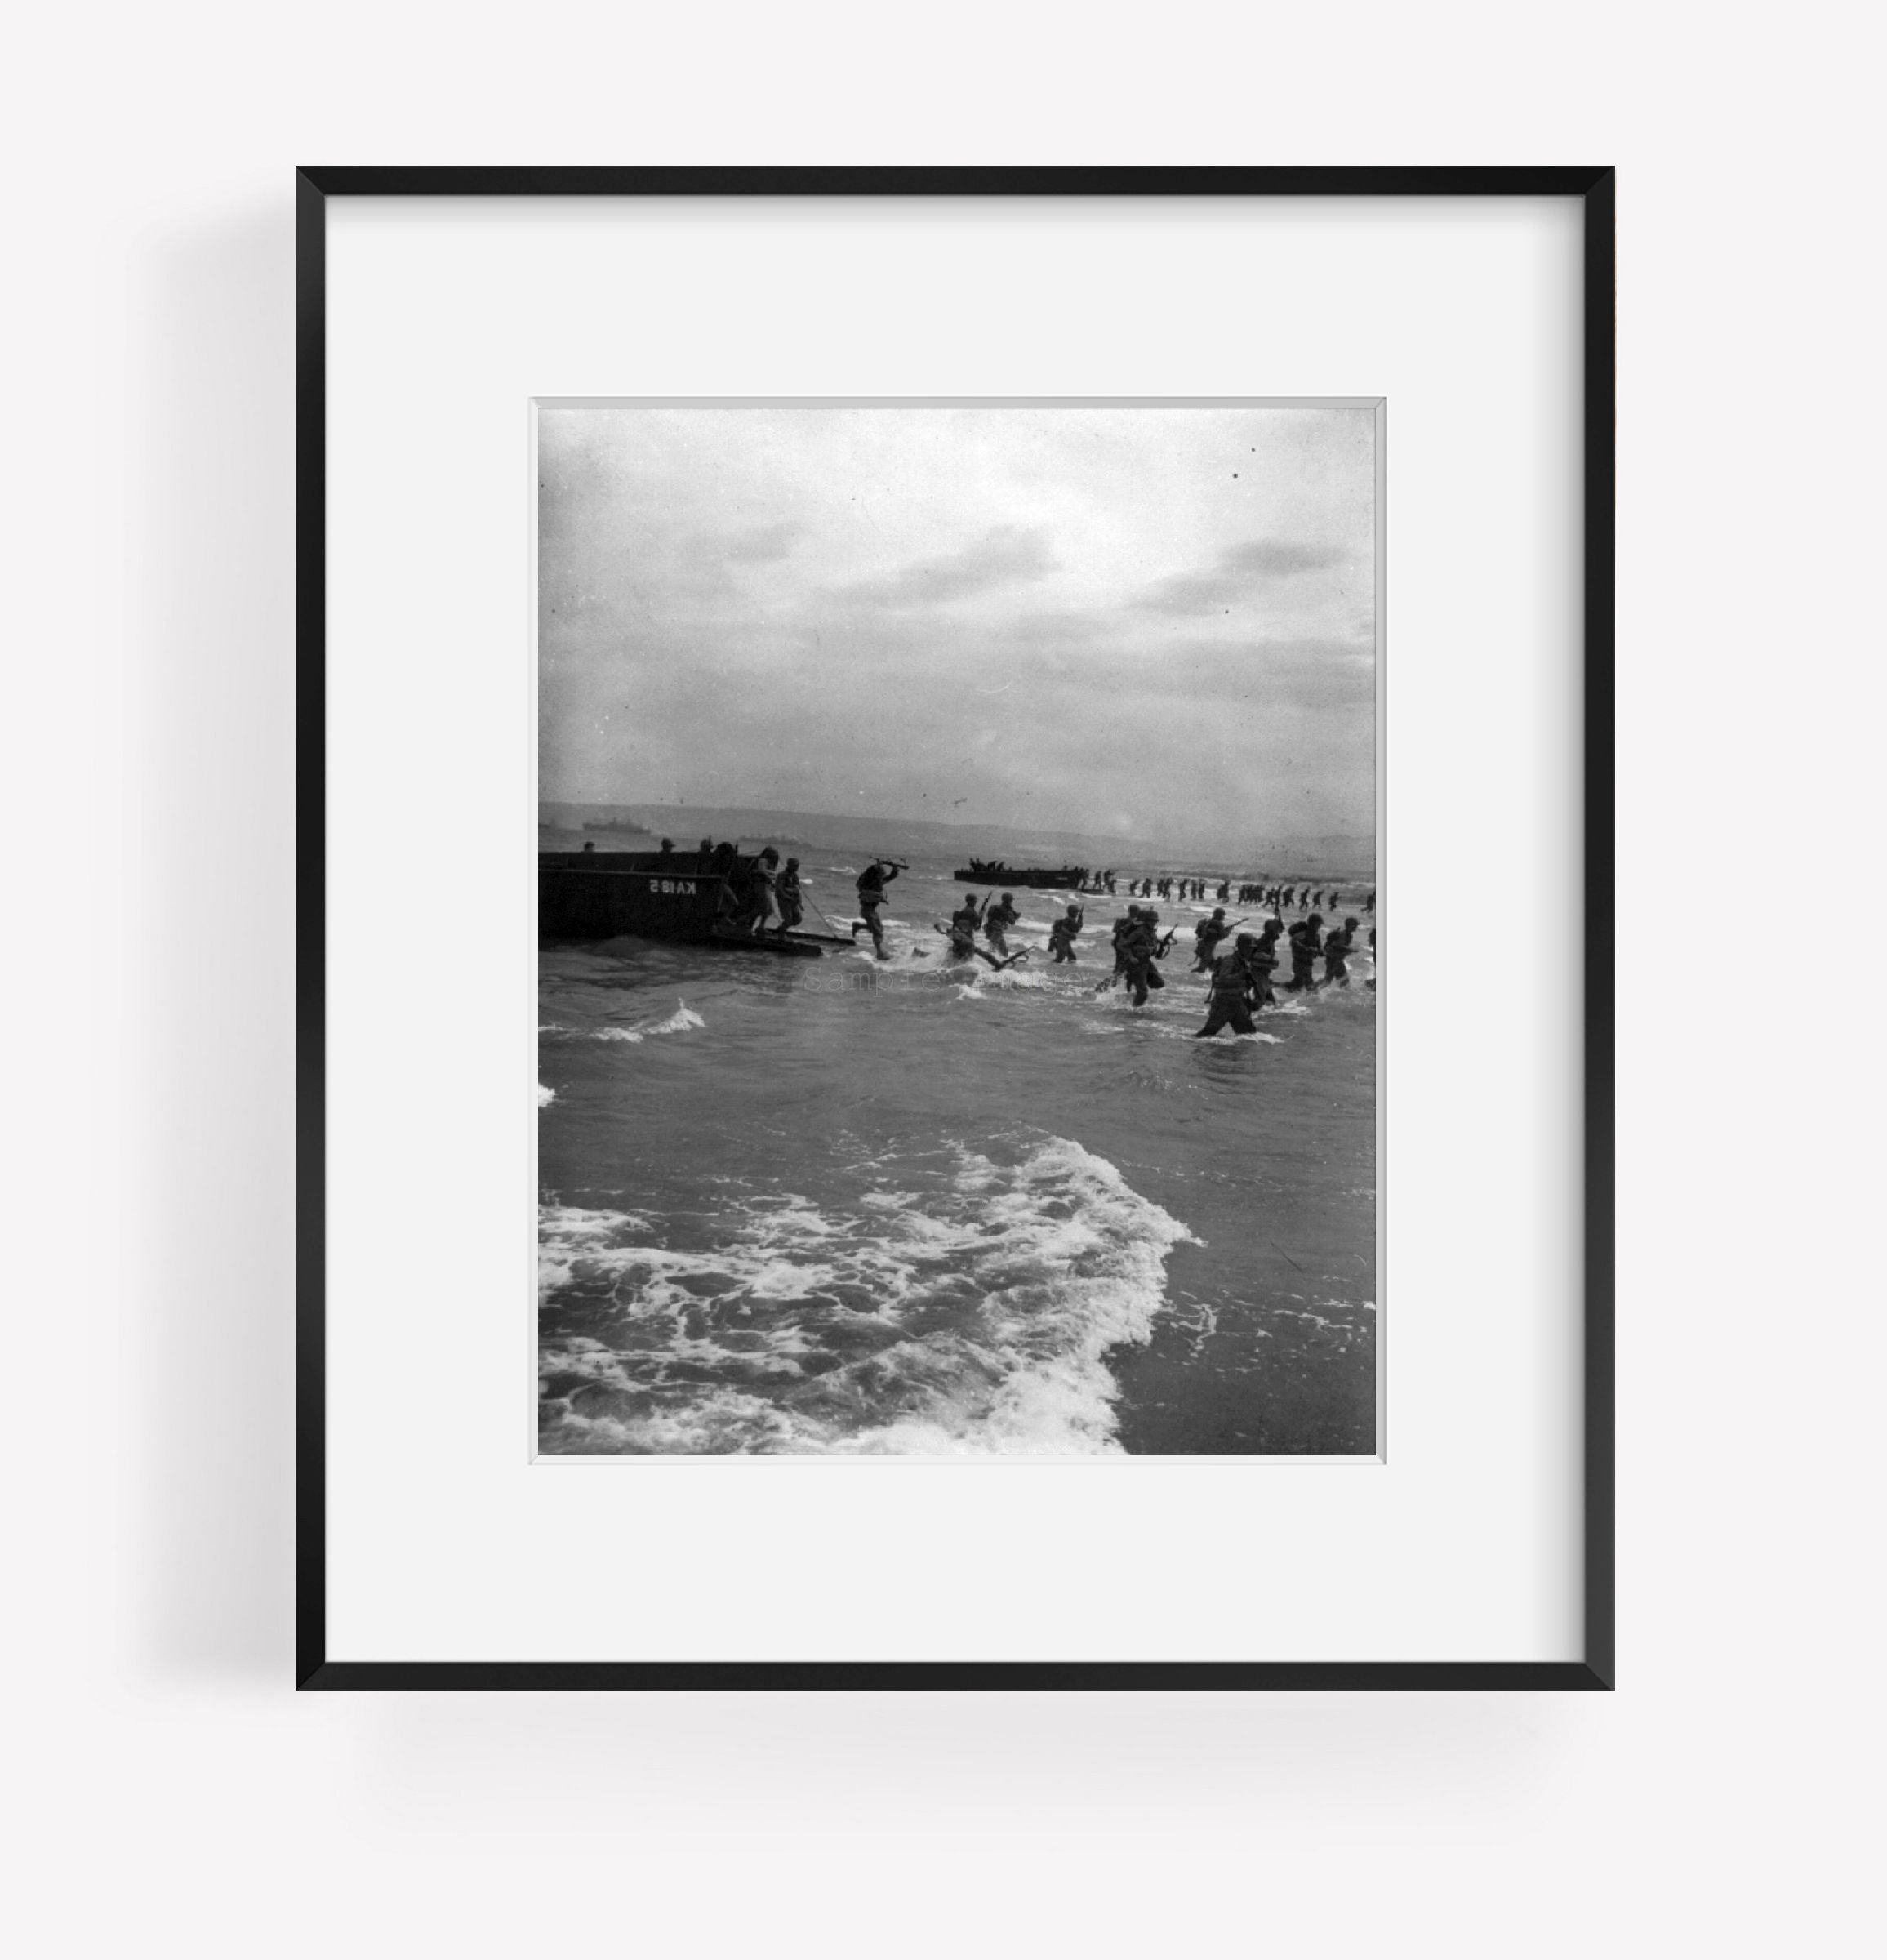 1941 Photo The invaders hit the beach From Coast Guard-manned "sea-horse" landin